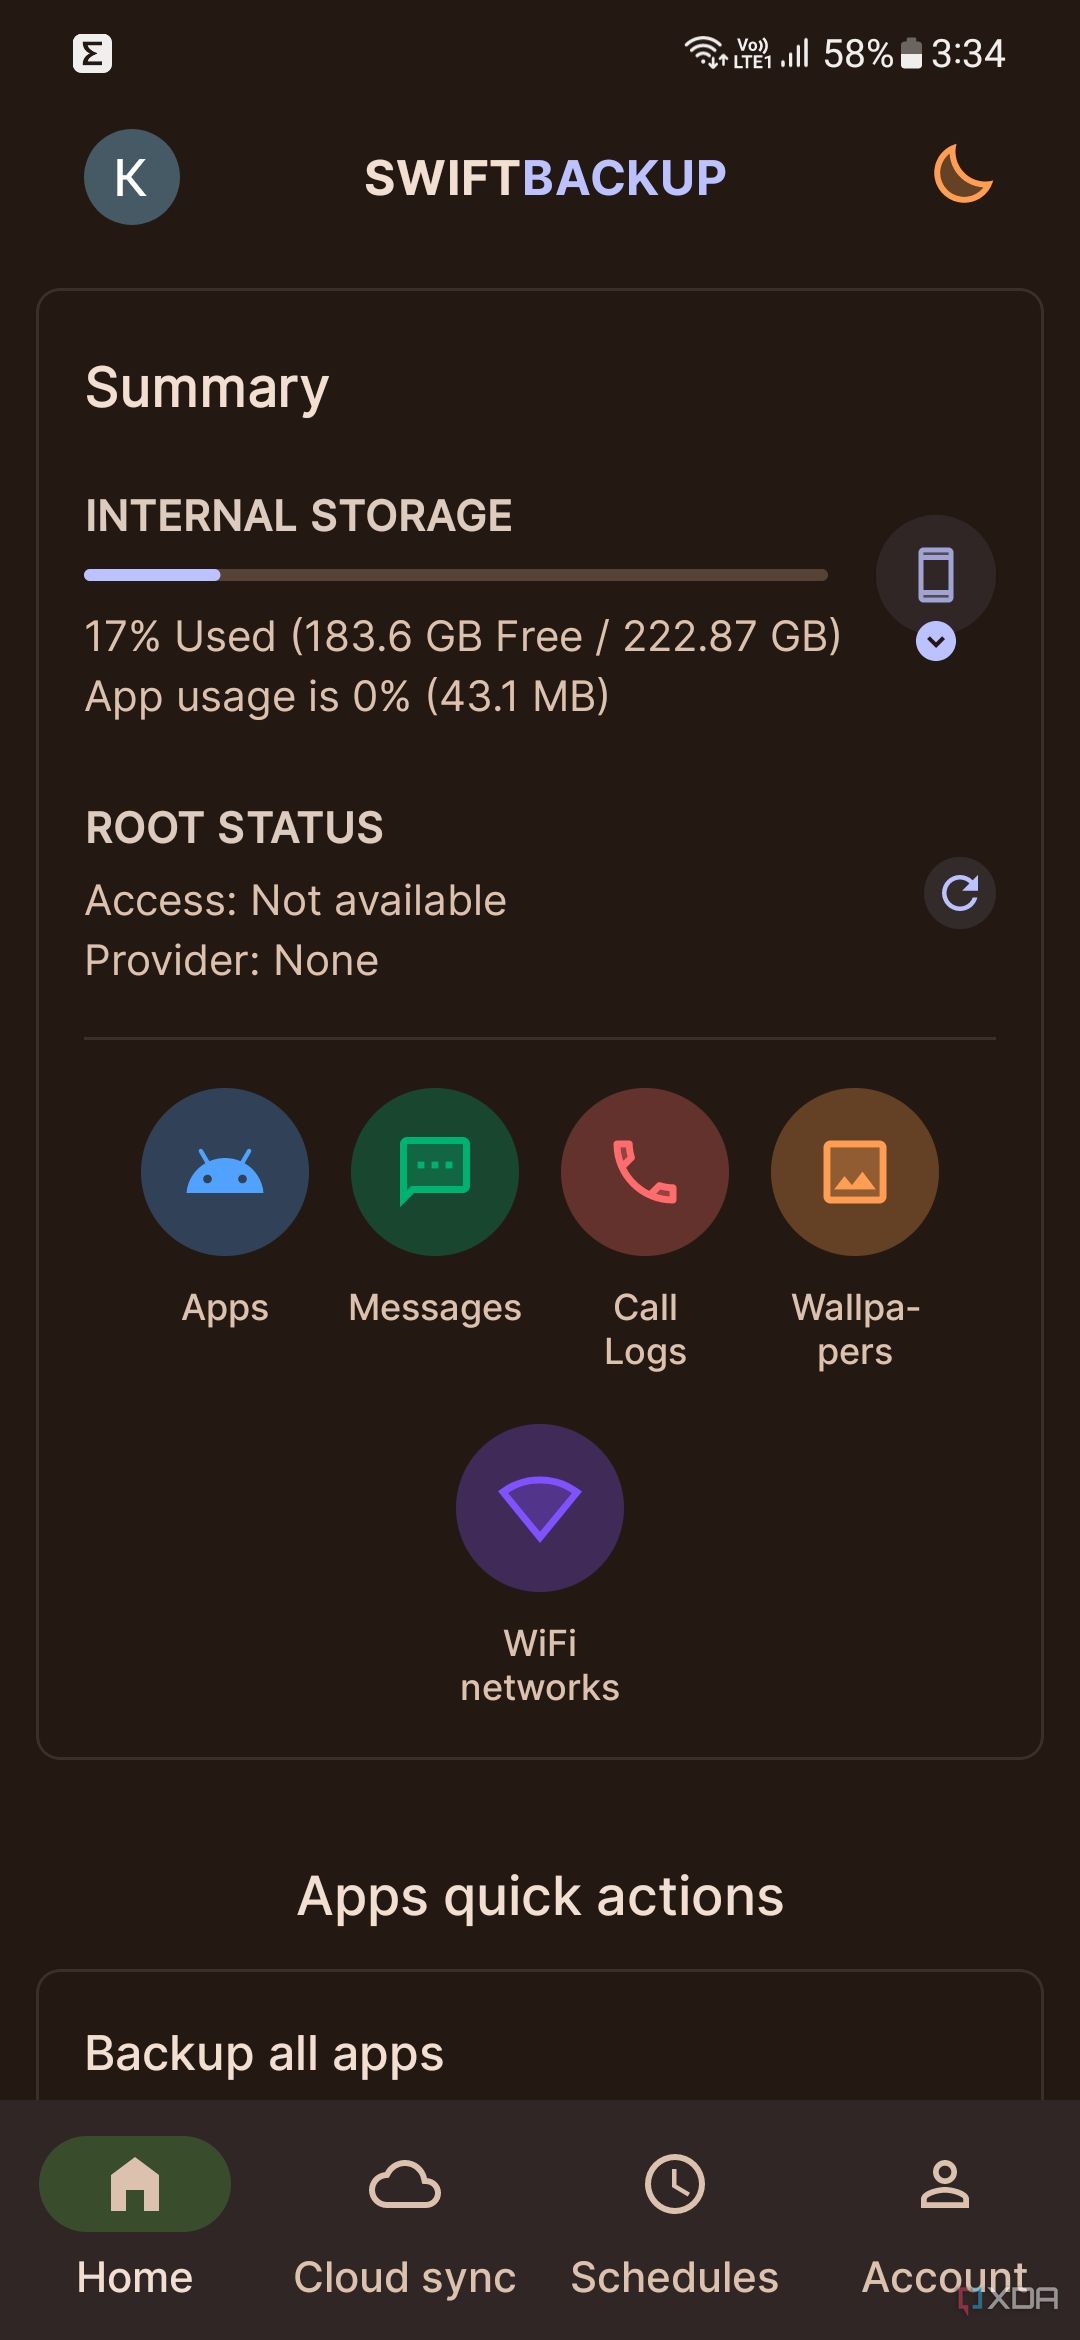 A screenshot showing the home page of the Swift backup app on Android.